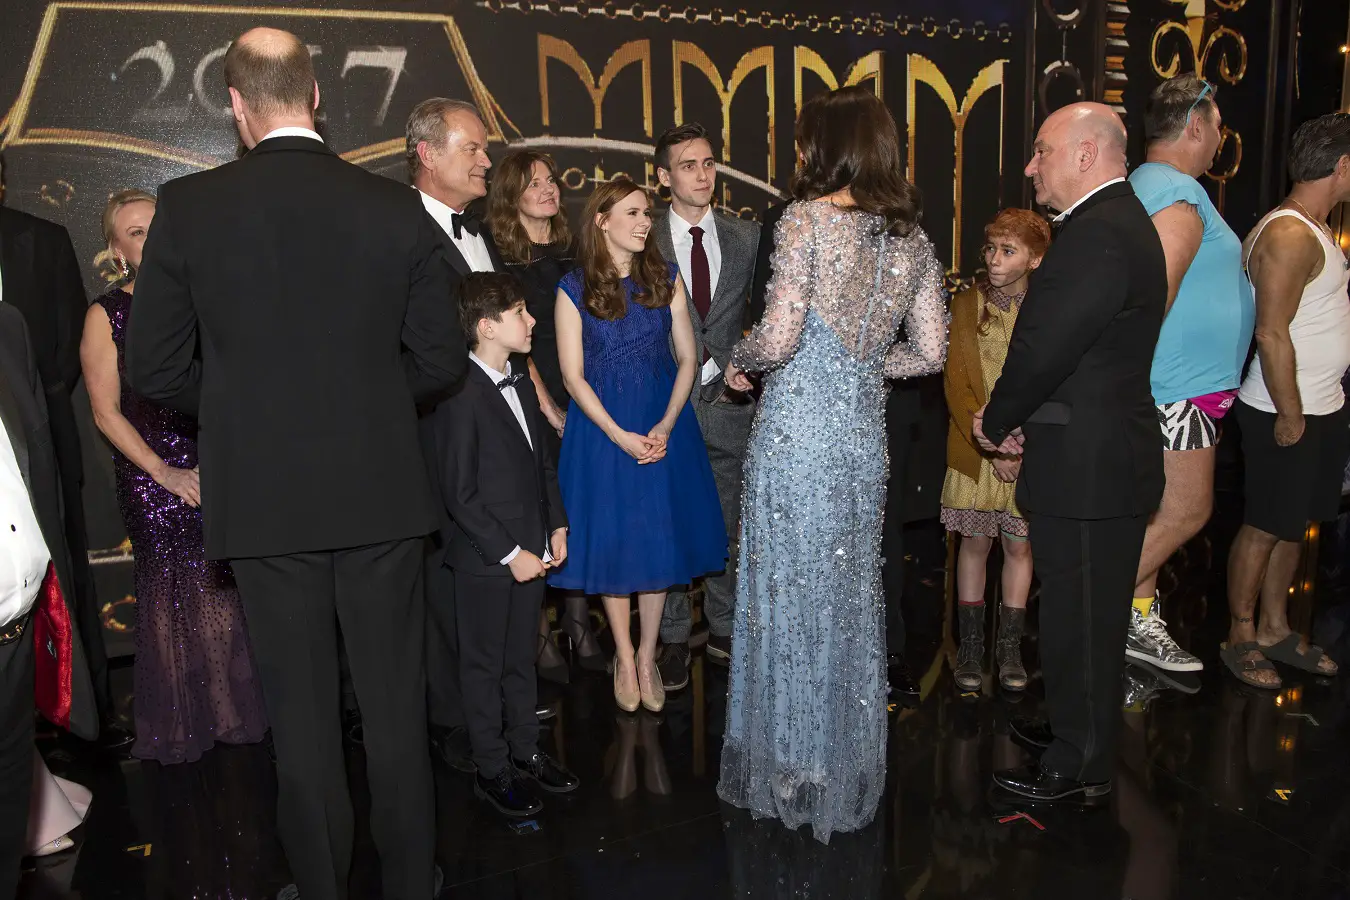 Duke and Duchess of Cambridge attended Royal Variety Performance in November 2017